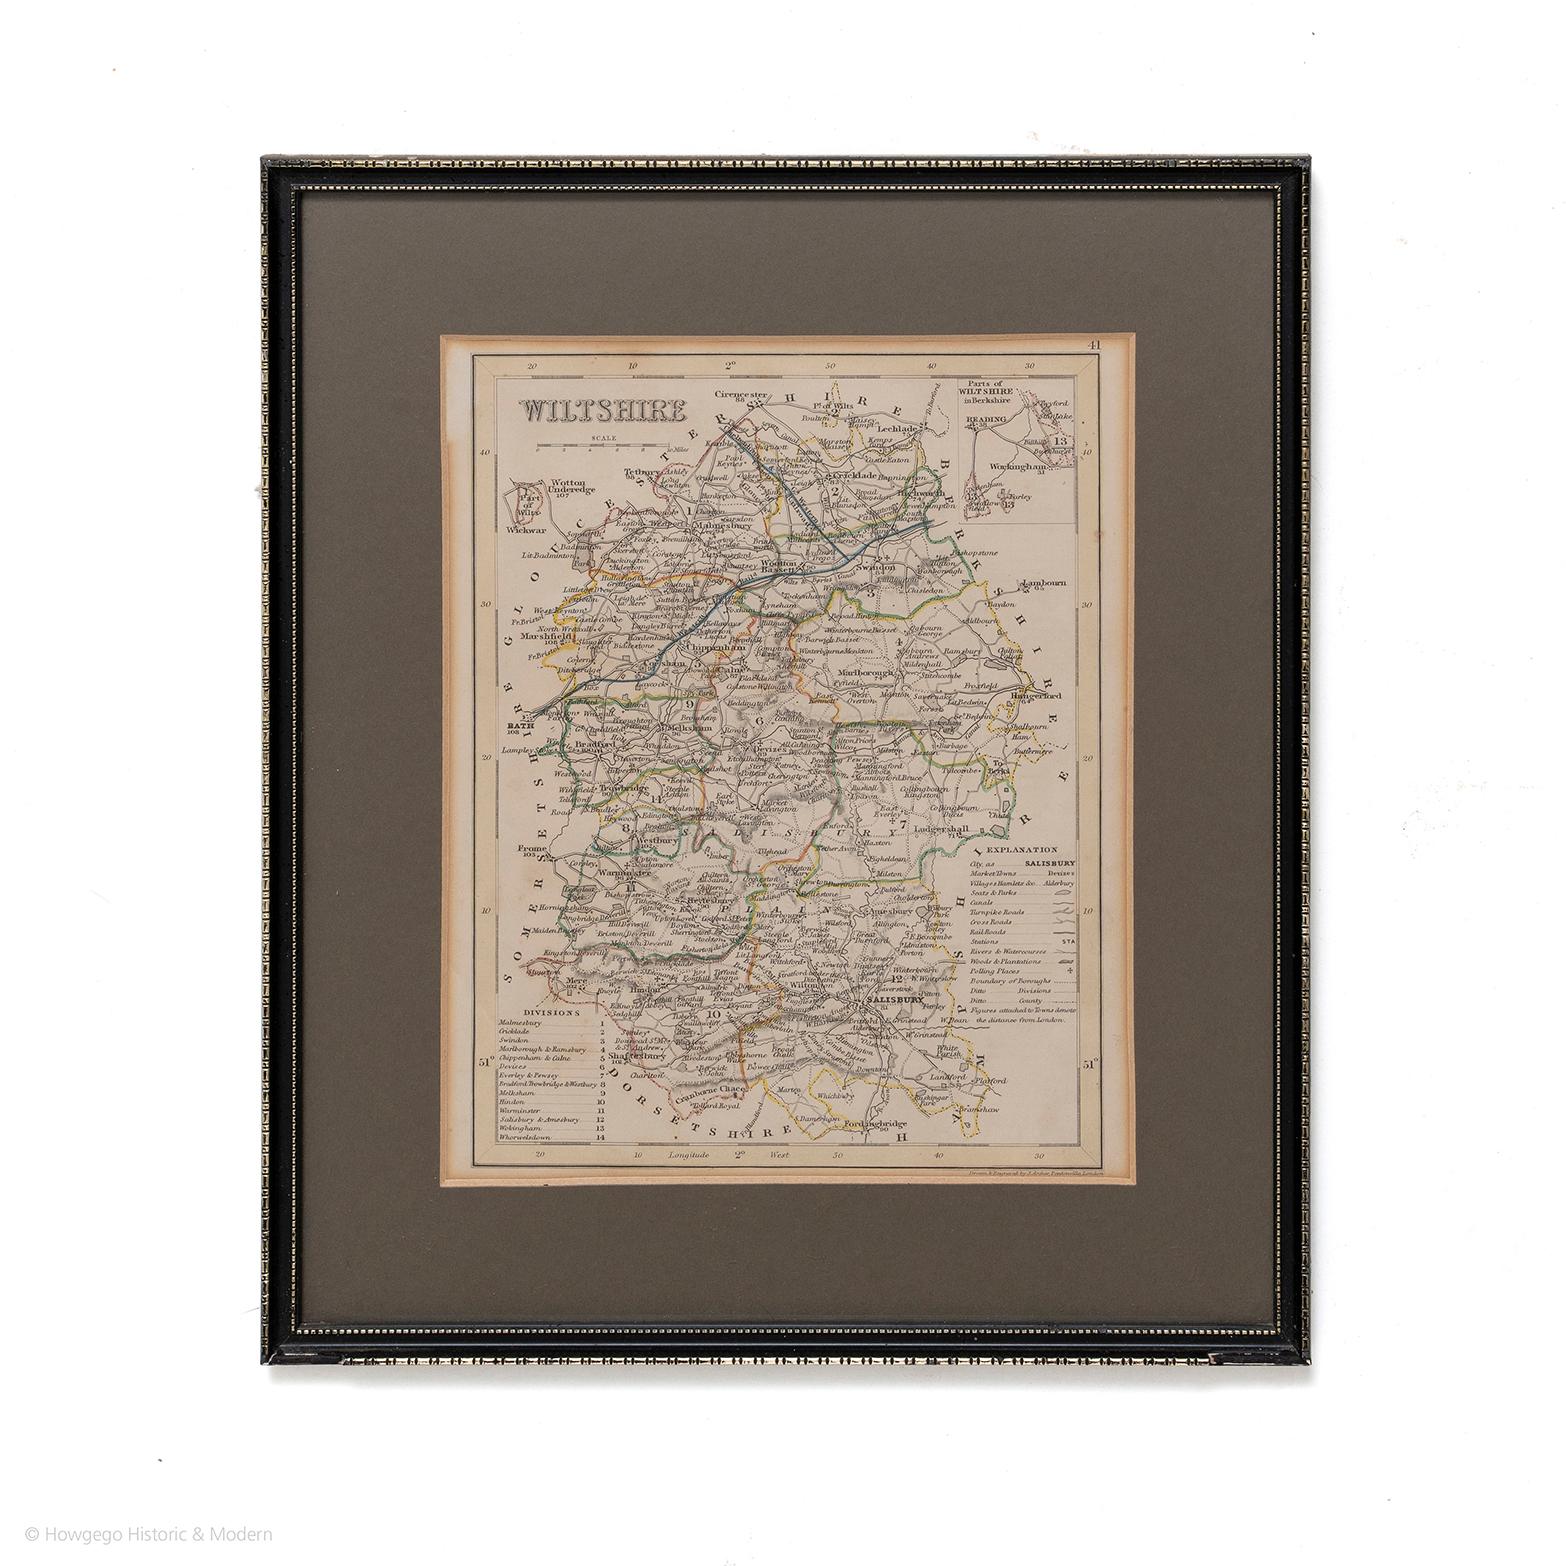 Map of Wiltshire Drawn & Engraved by Joshua Archer Pentonville London
Window Parts of Wiltshire in Berkshire
Explanation of Salisbury
County Divisions